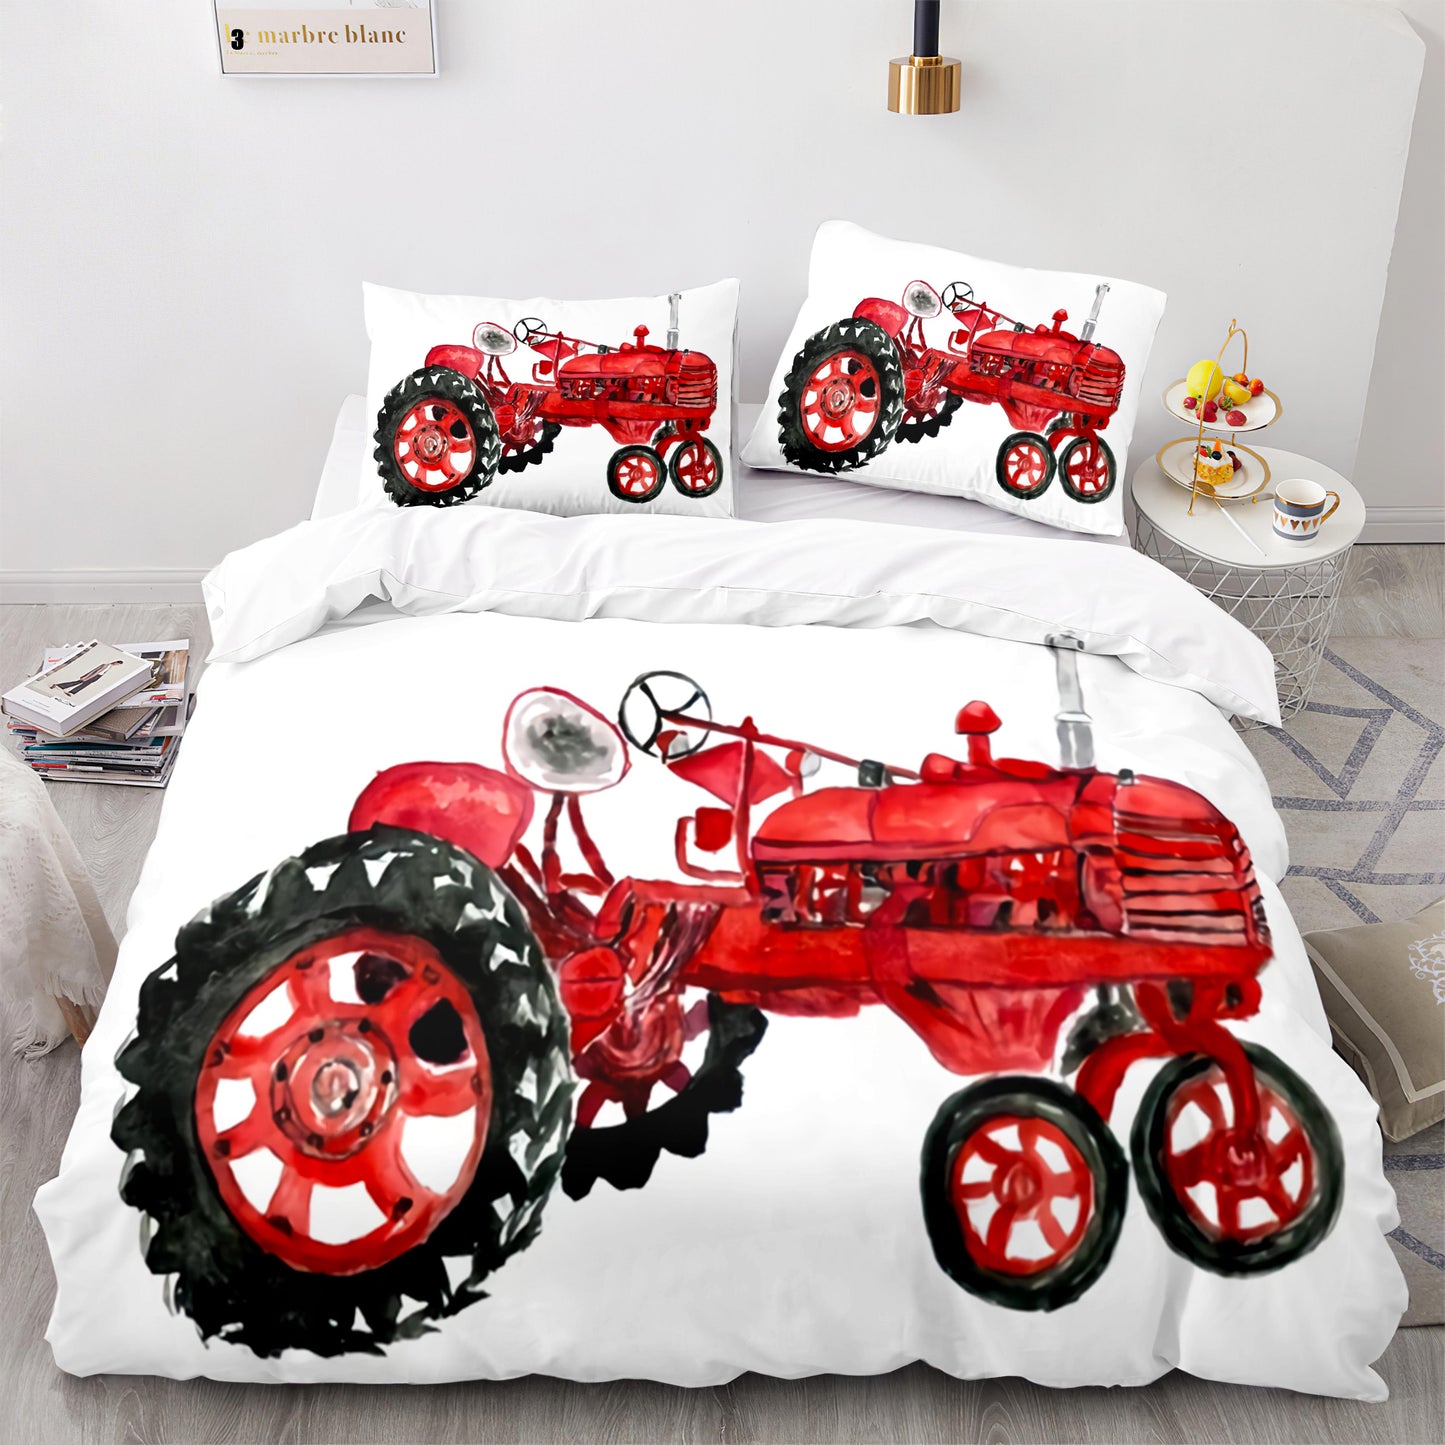 Red tractor duvet cover